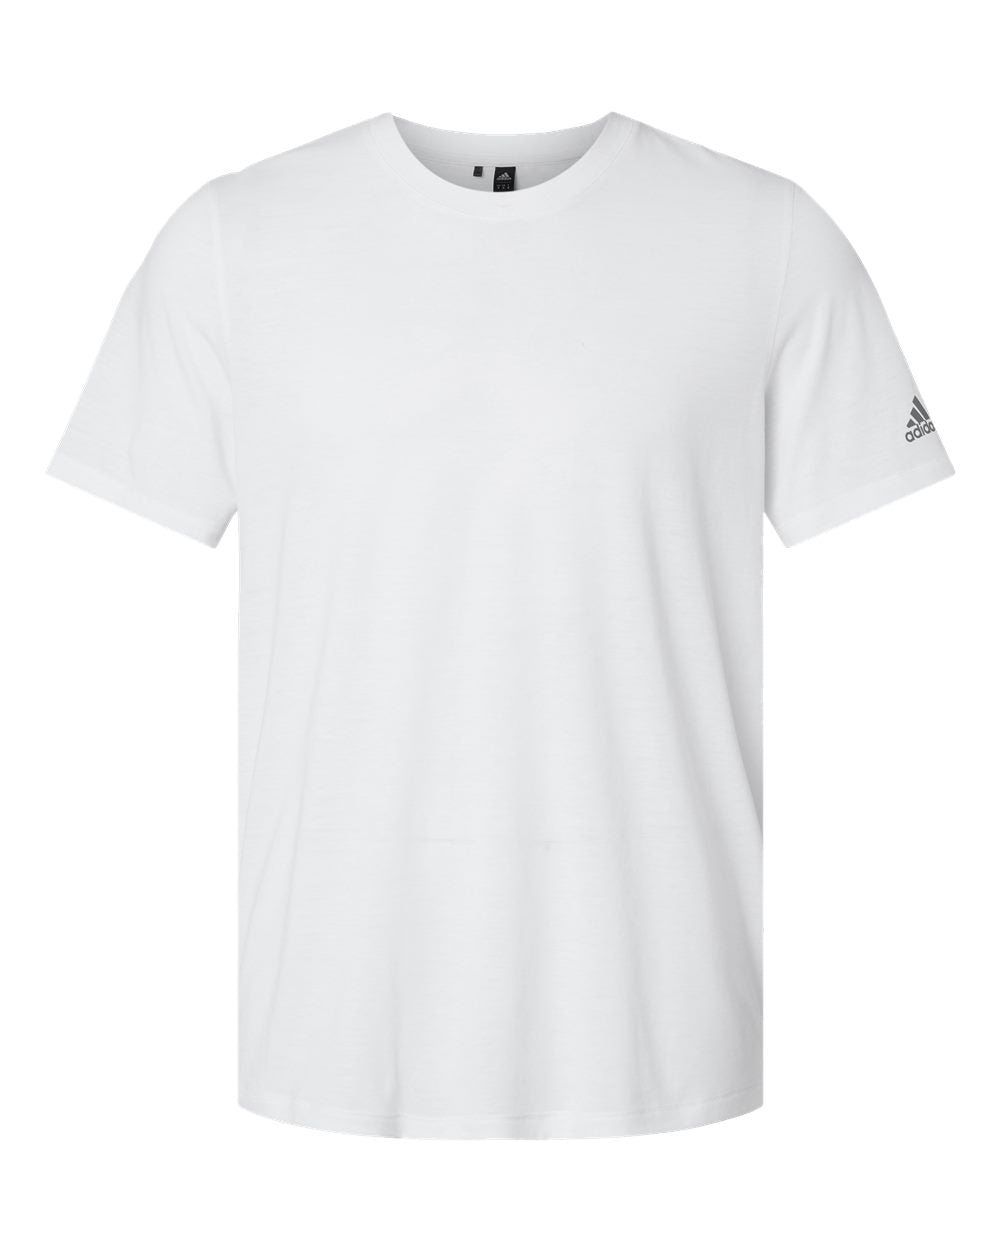 Adidas A556 Blended T-Shirt #color_White